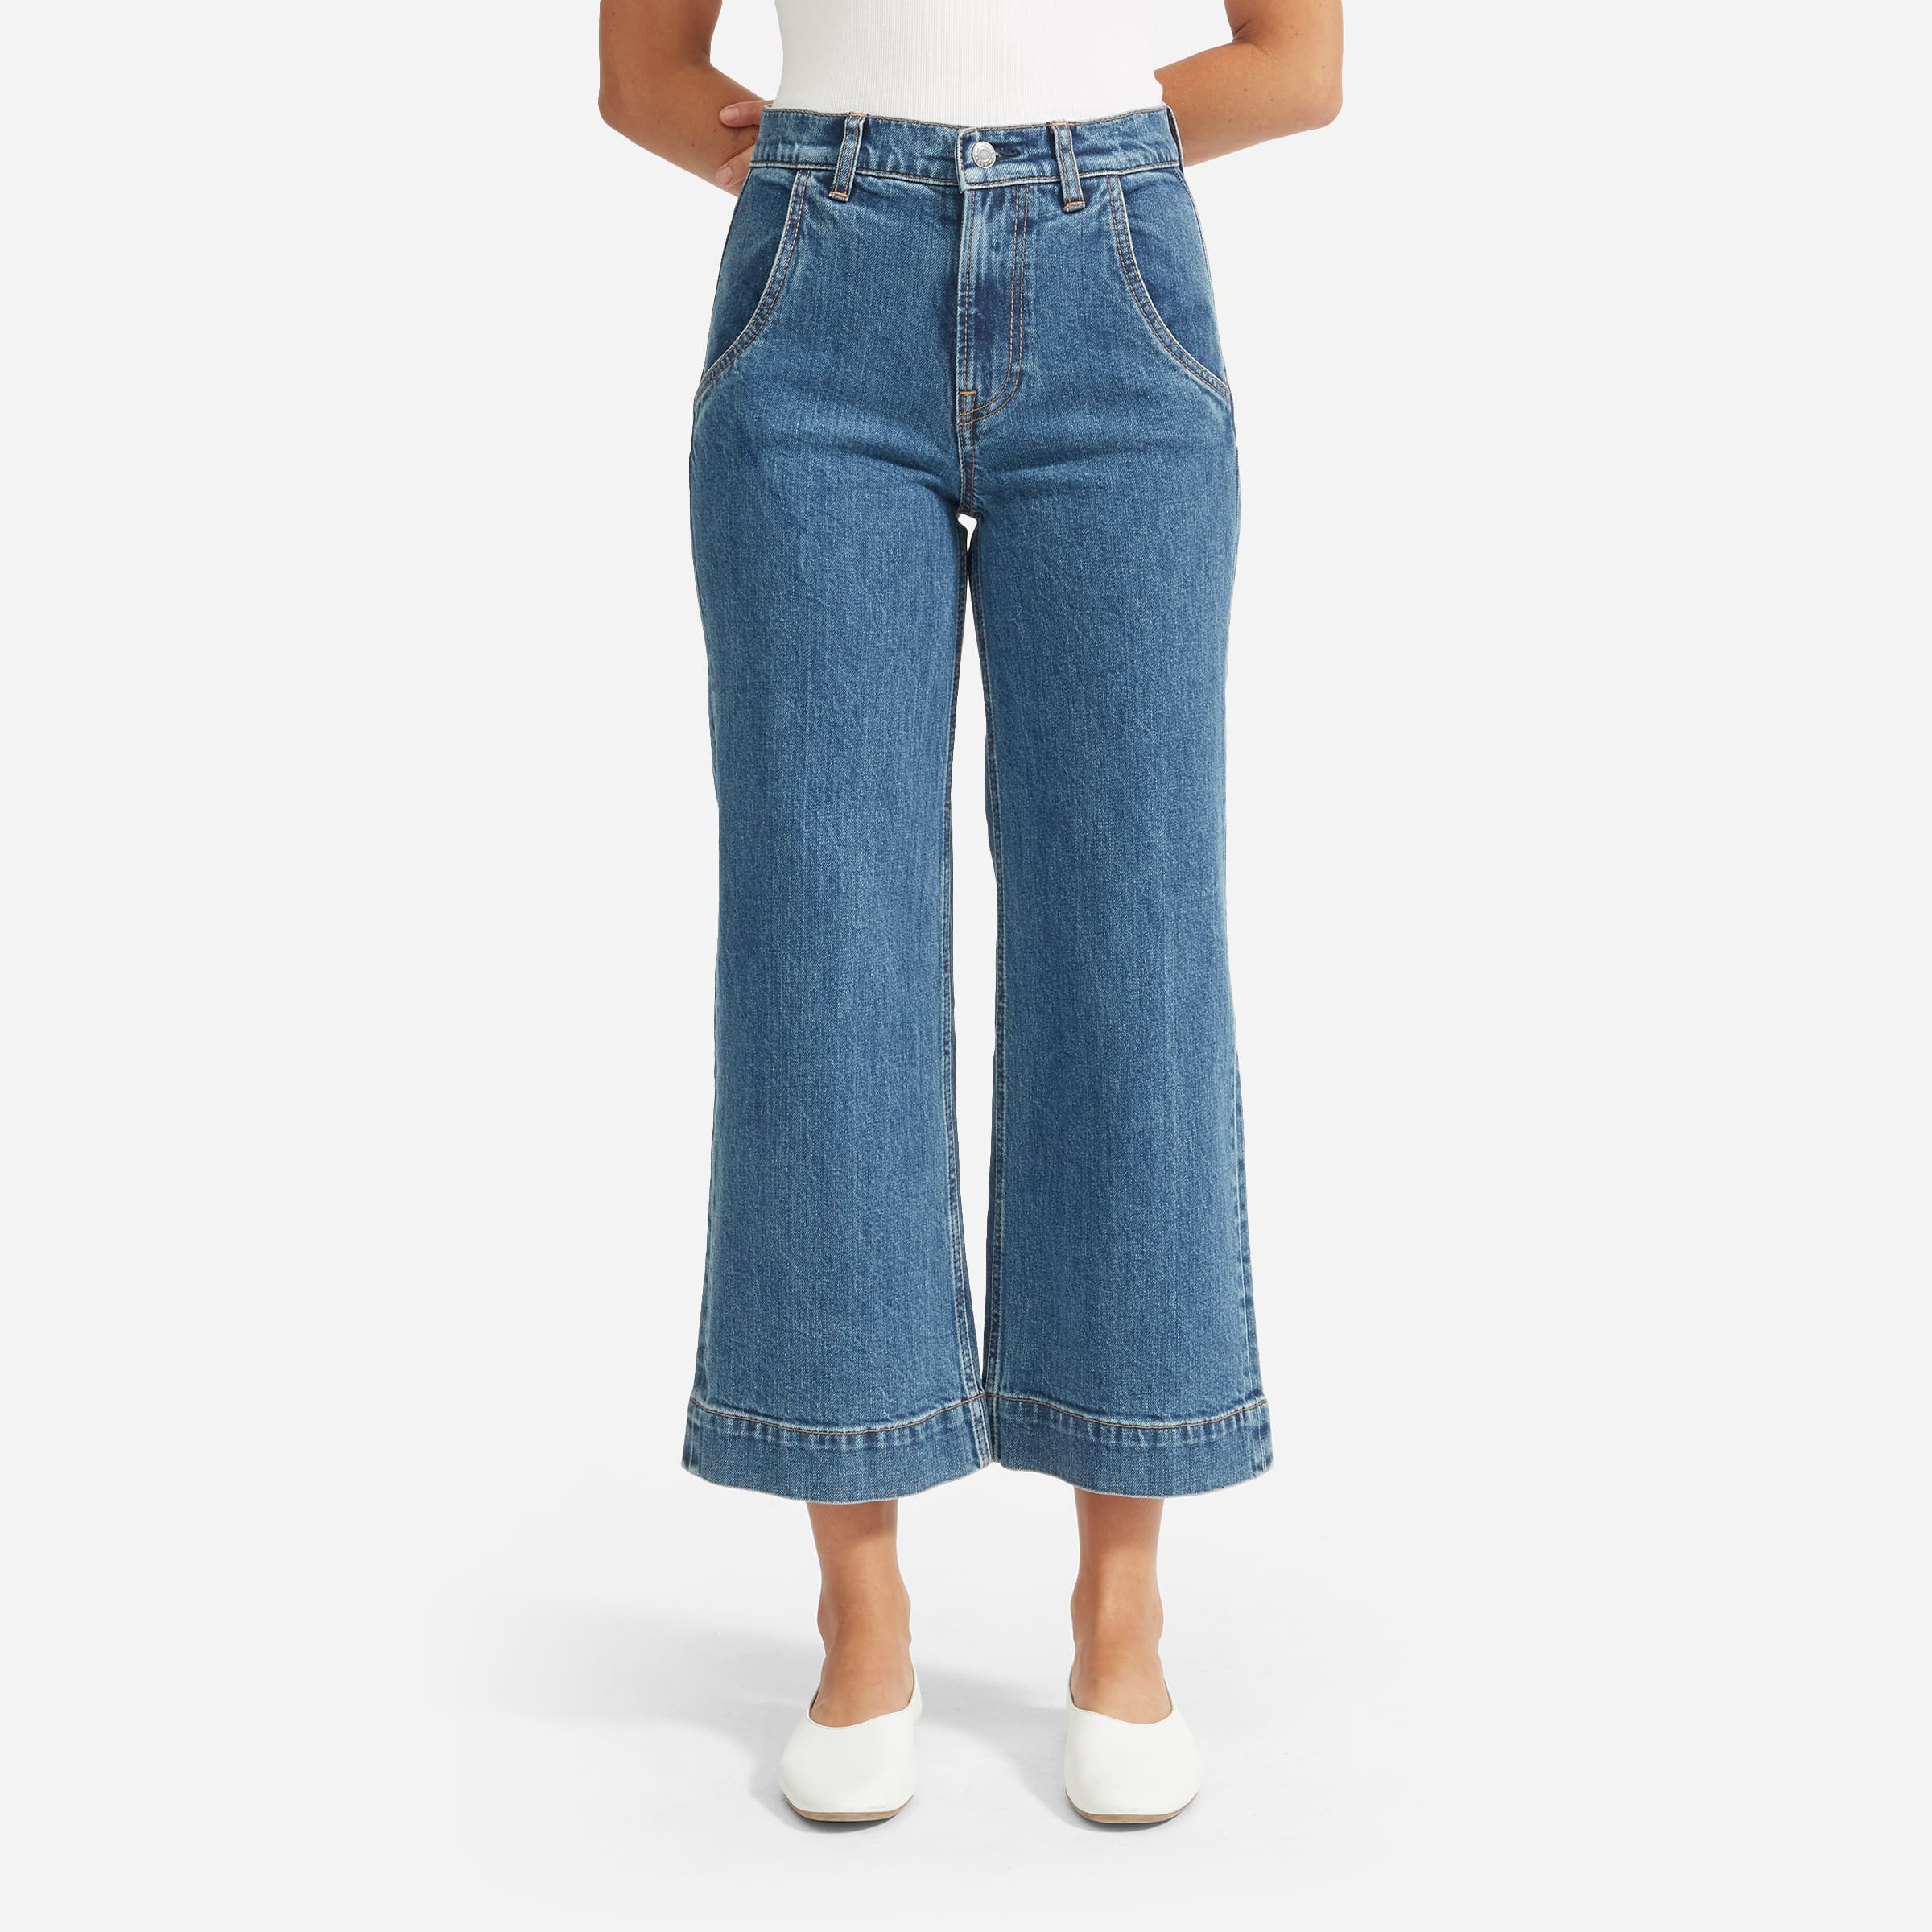 everlane wide leg jeans - OFF-60% >Free Delivery